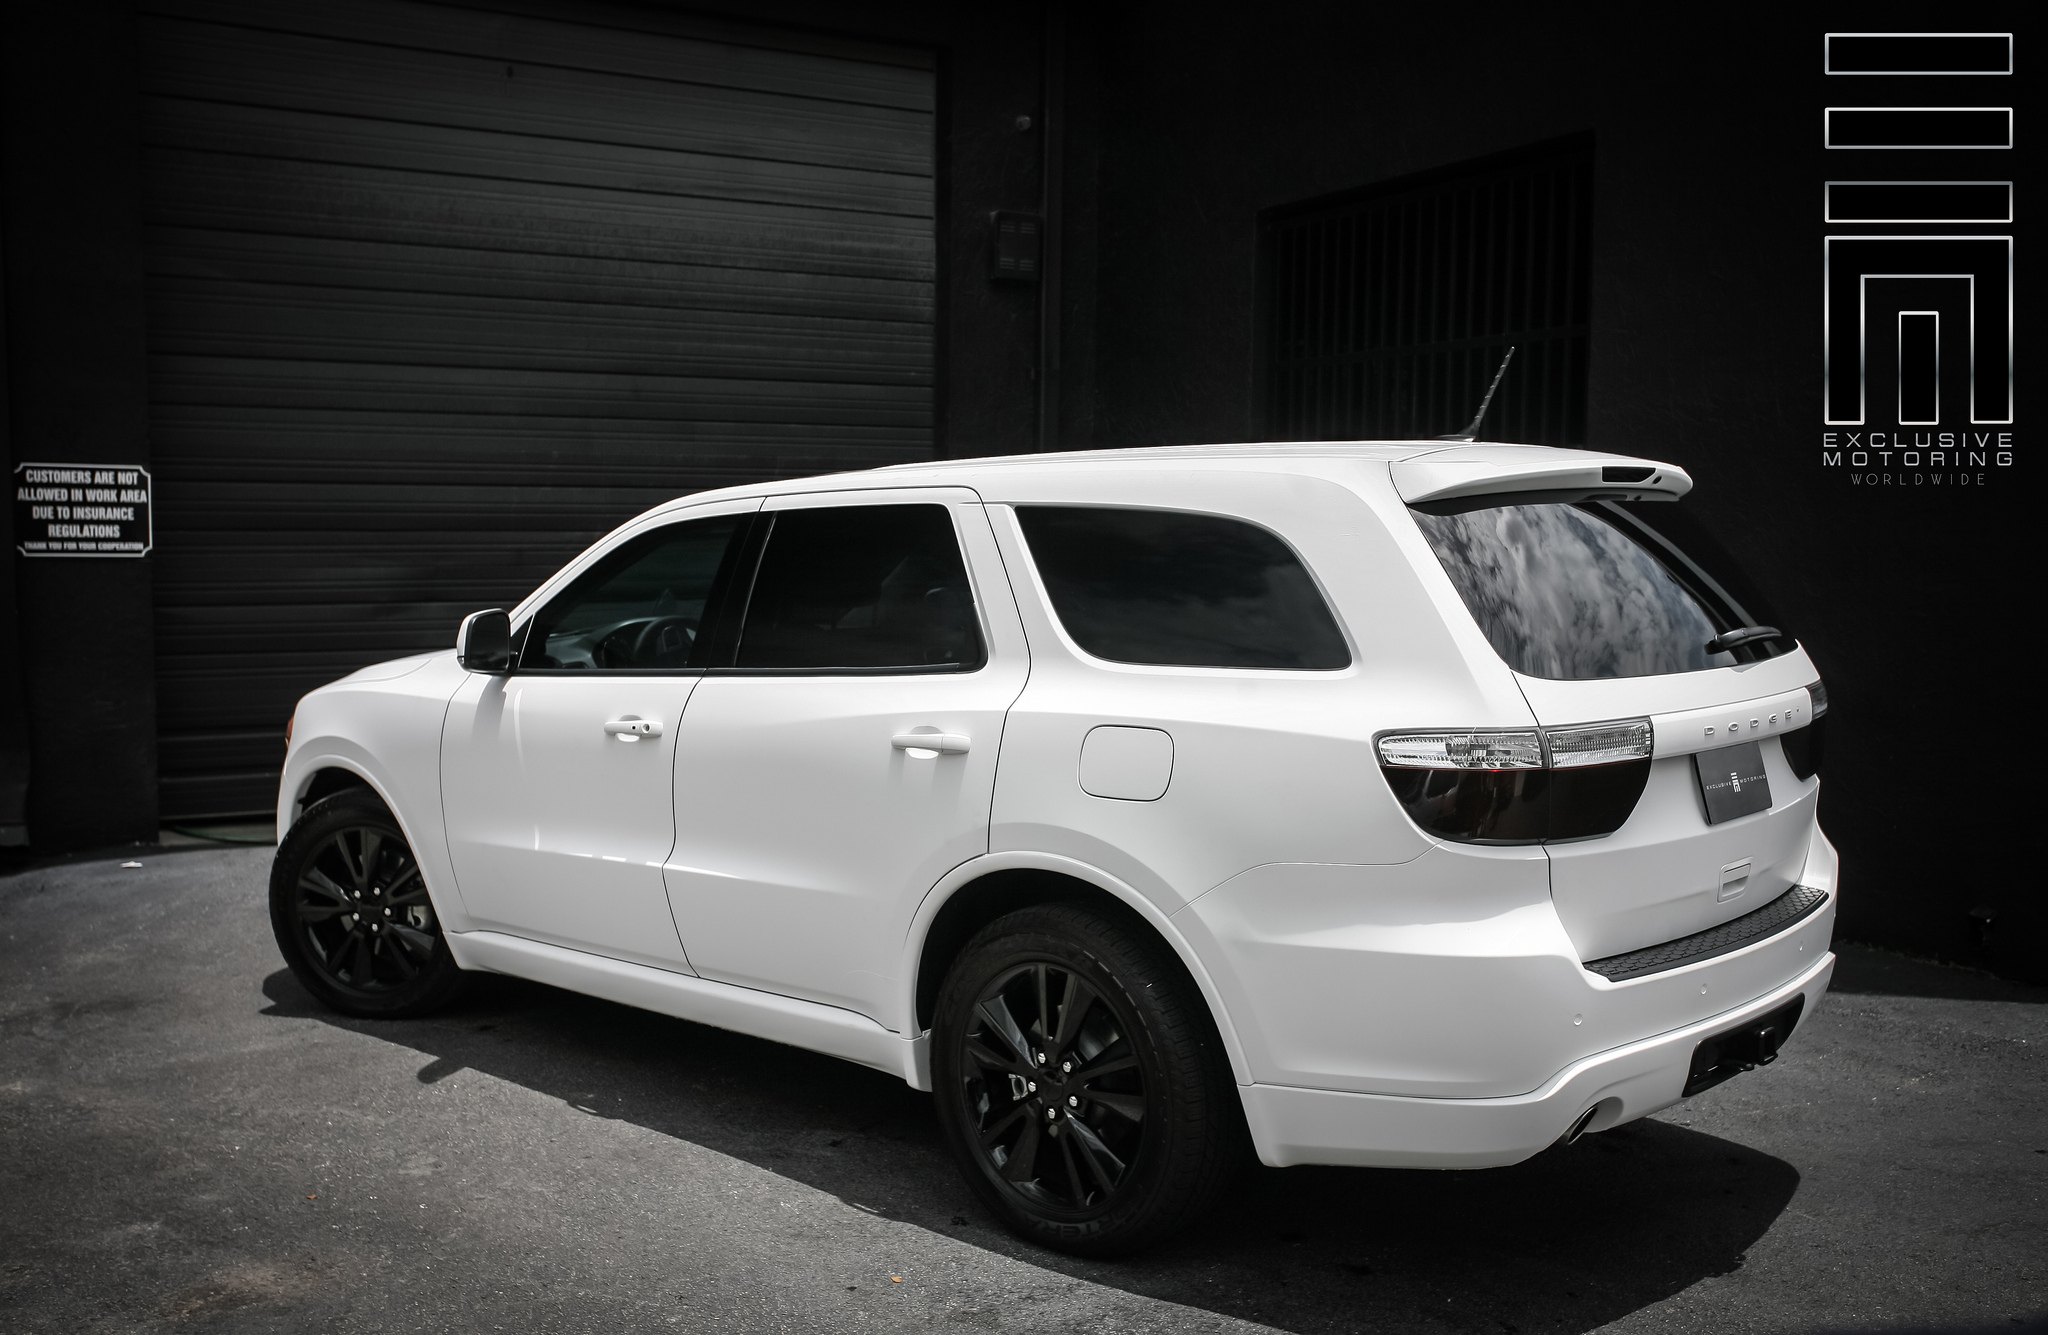 Dodge Durango R/T Black LED Taillights - Photo by Exclusive Motoring